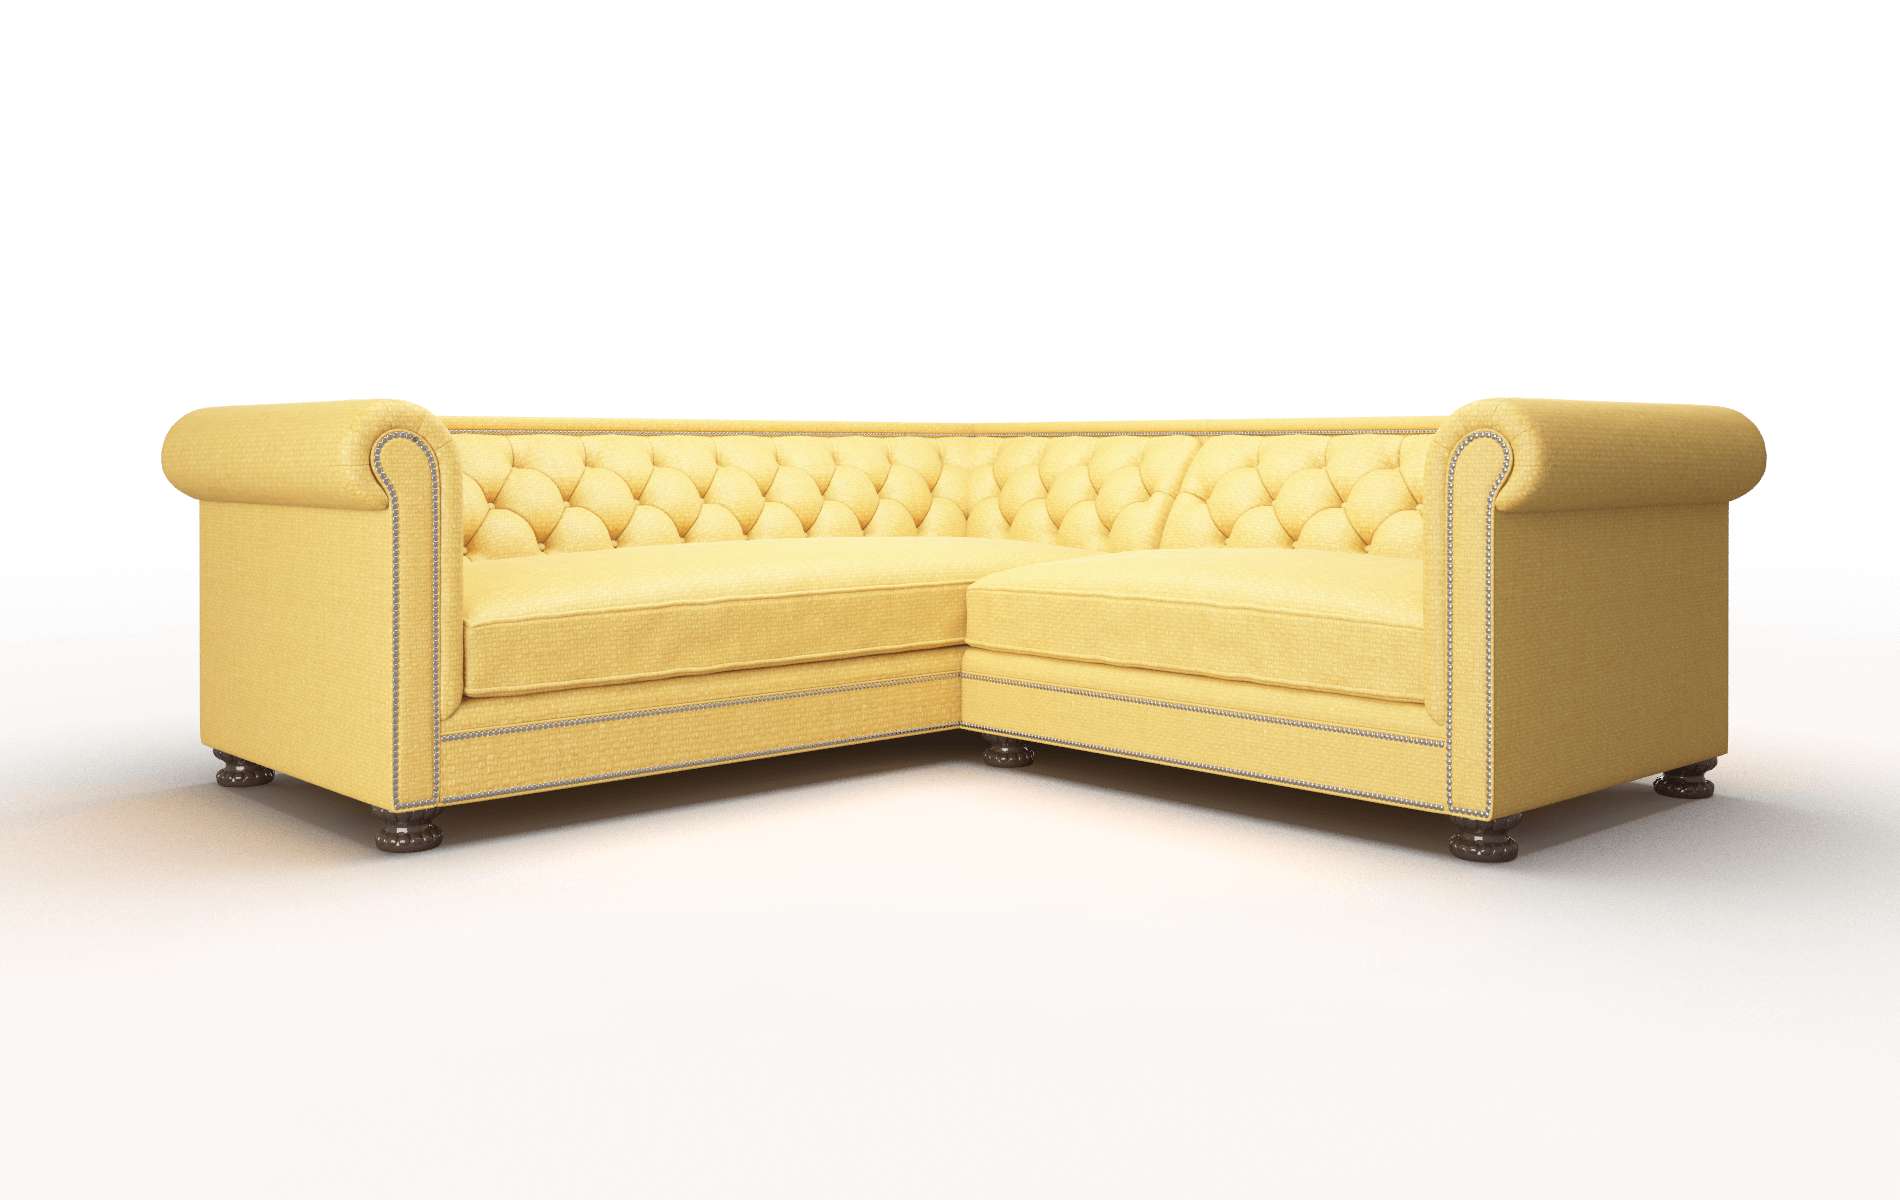 Athens Glee Aglow Sectional espresso legs 1